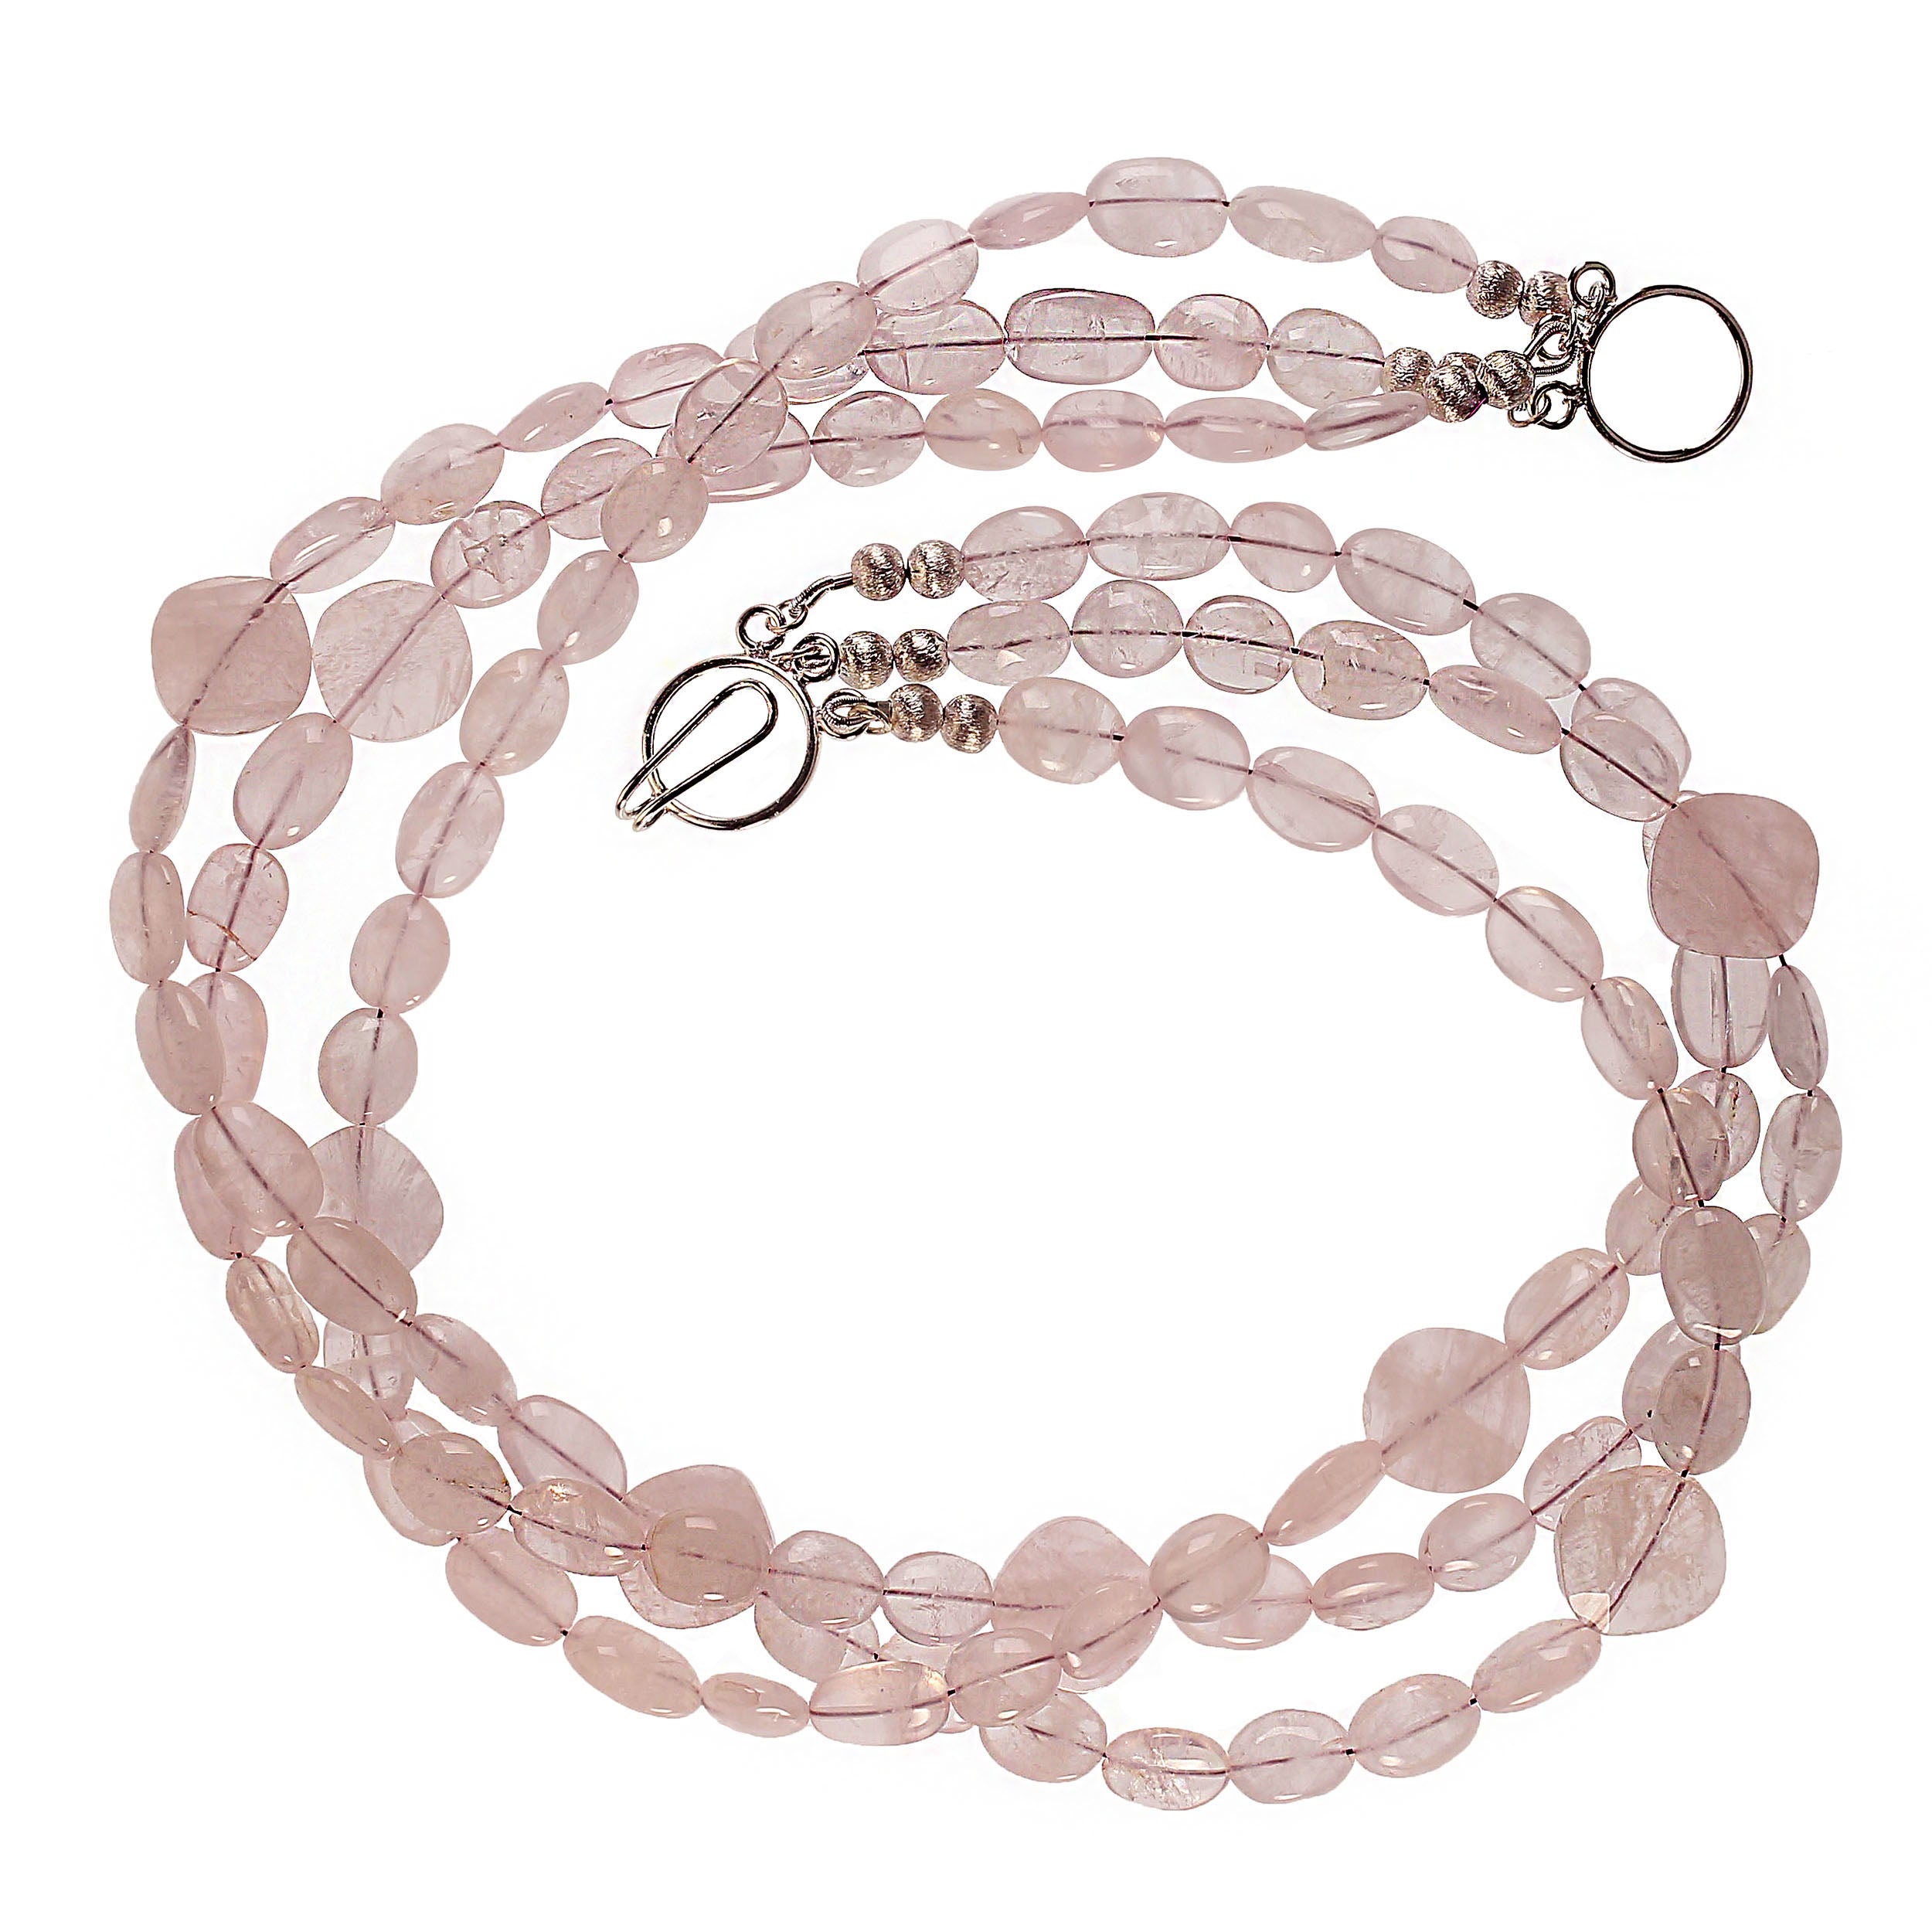 AJD 19 Inch Three strand  Glowing Rose Quartz necklace For Sale